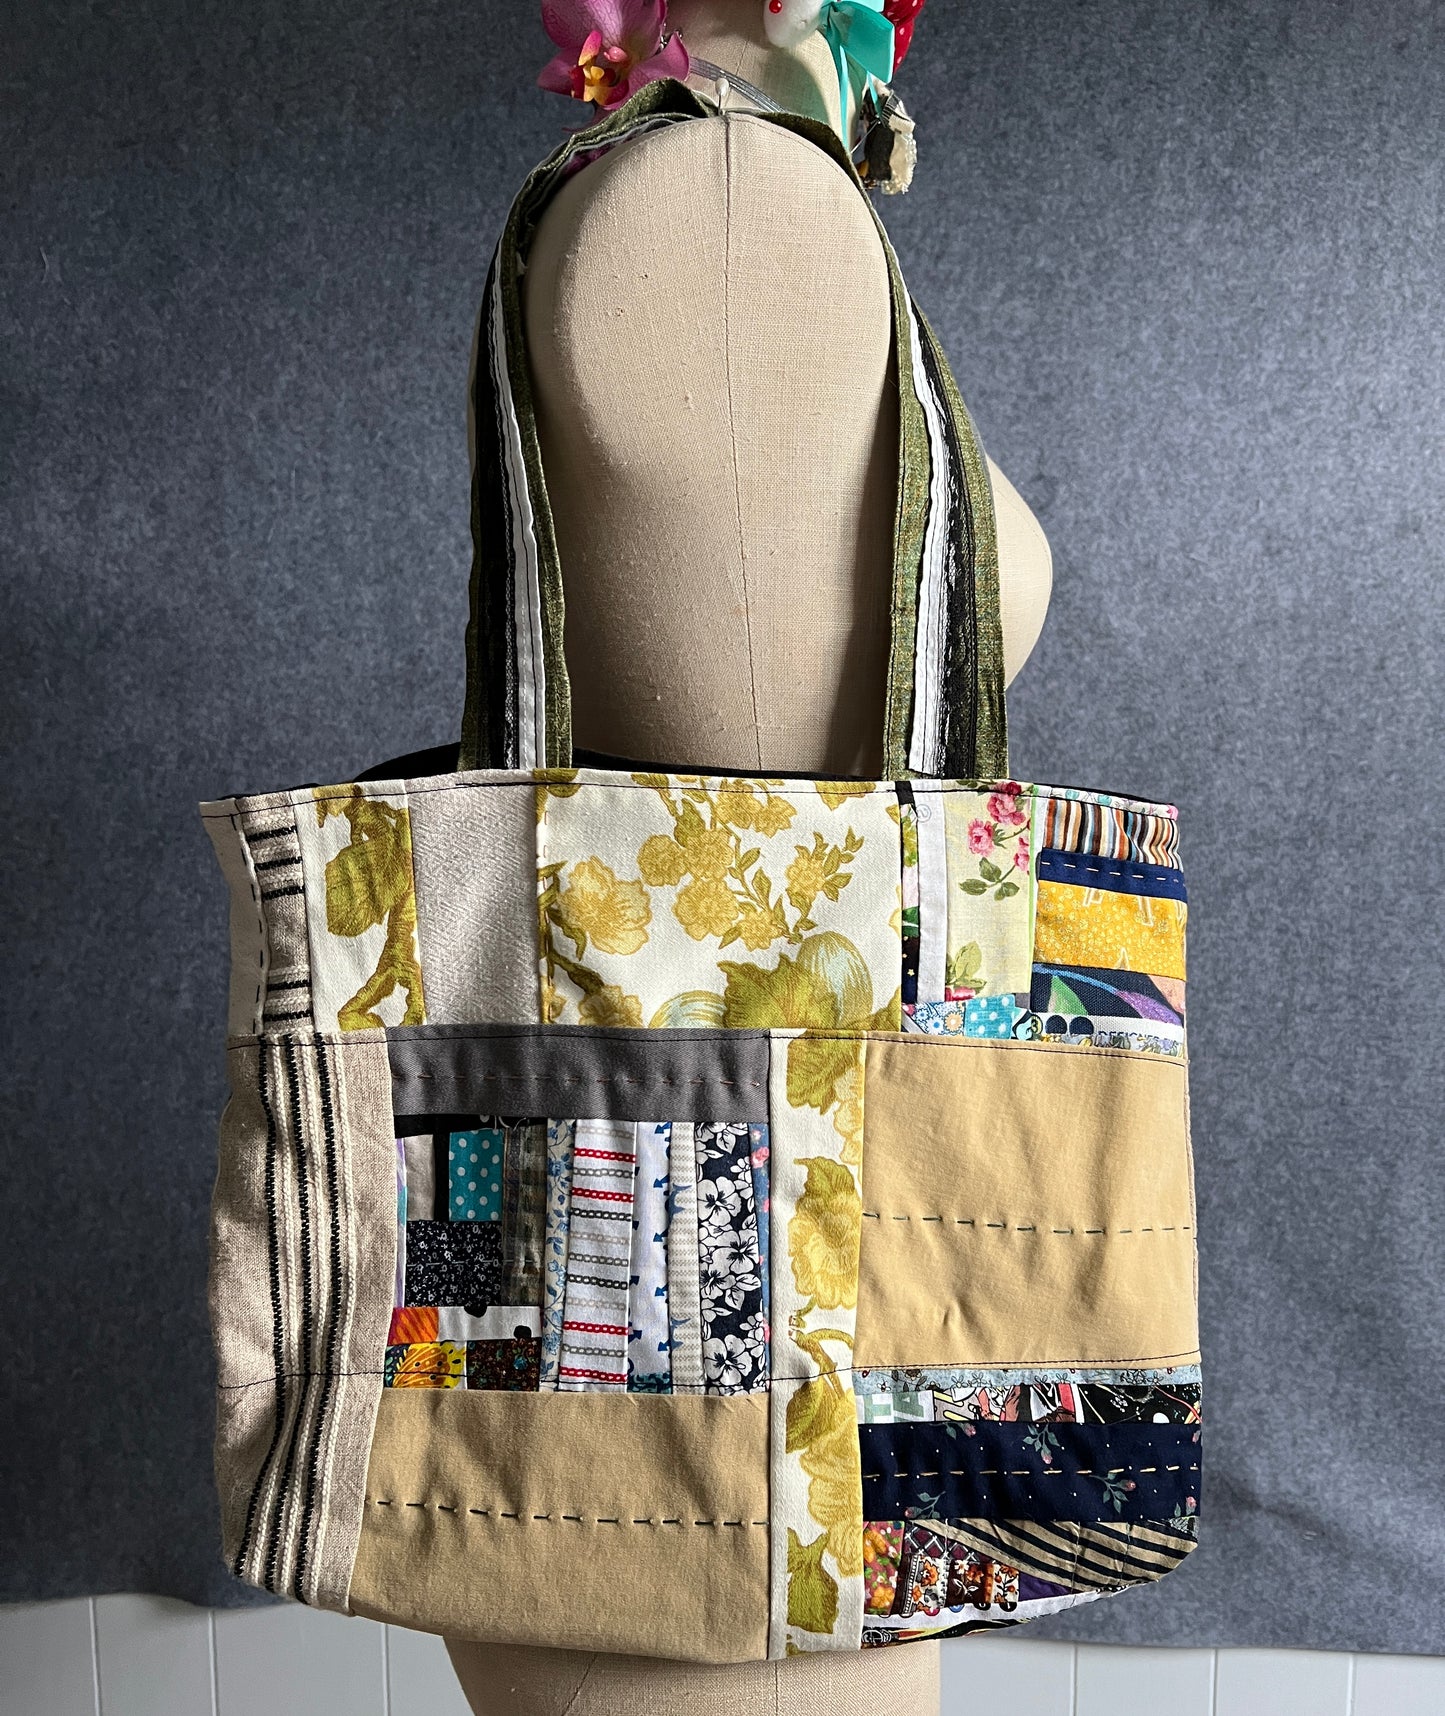 Big Sustainable Tote Bag - Denim and Khaki Scraps - Fully Lined with Pockets!